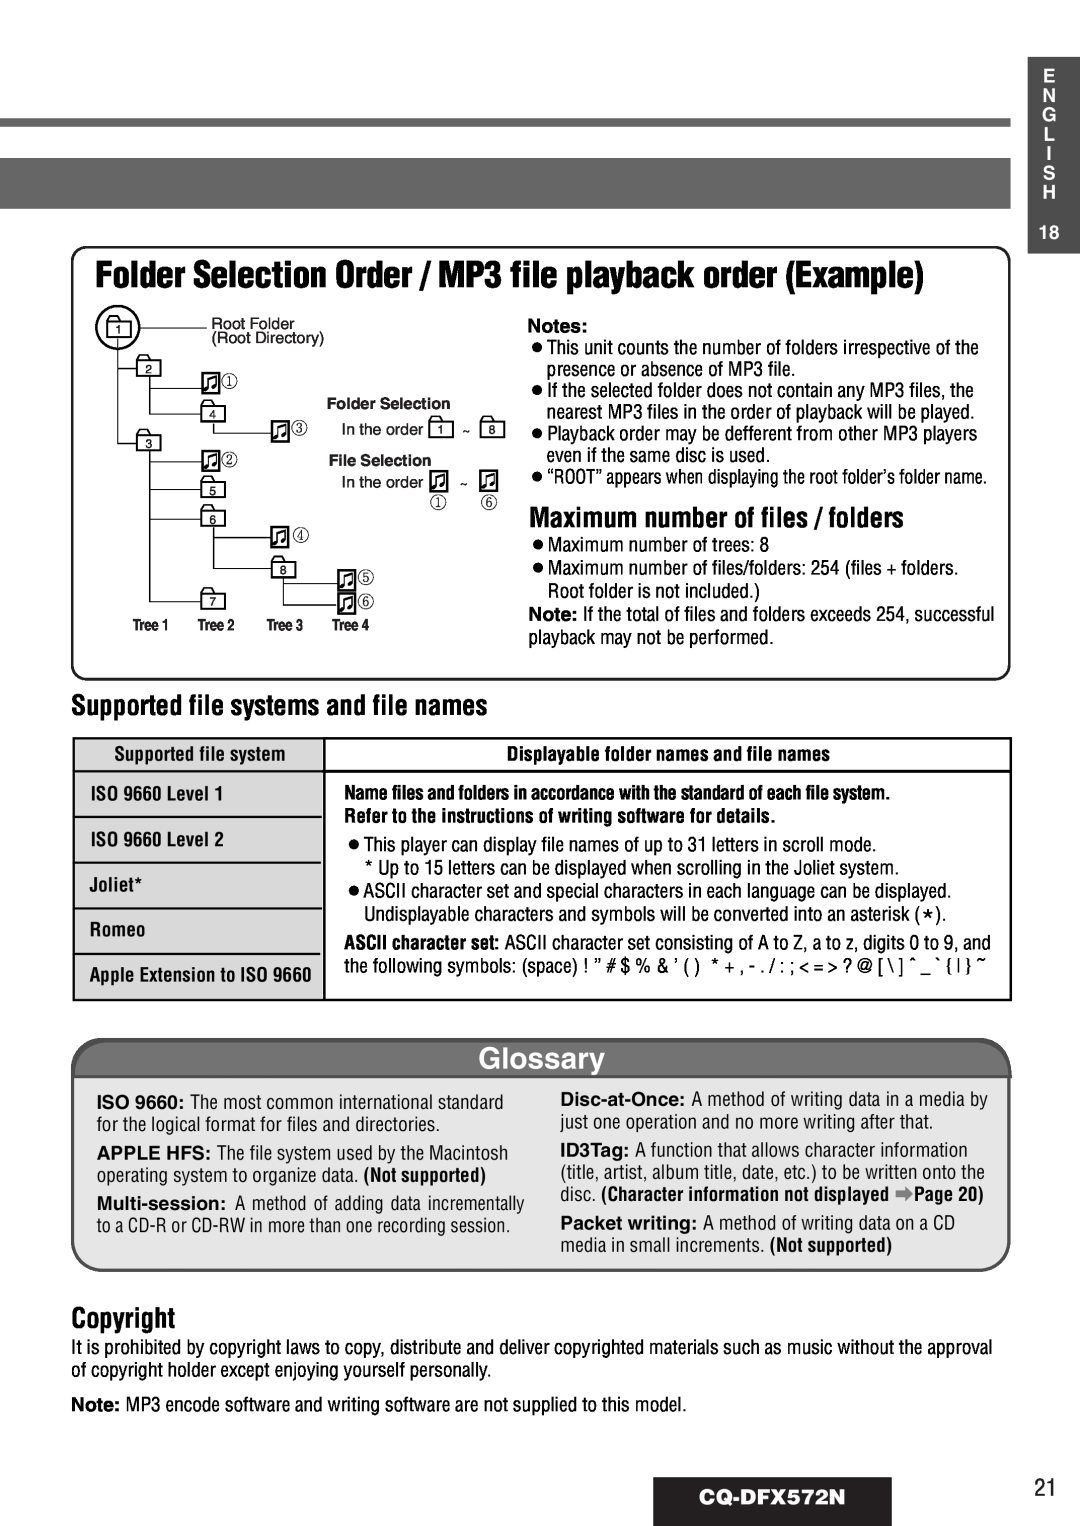 Panasonic Maximum number of files / folders, Supported file systems and file names, Copyright, CQ-DFX572N21, Glossary 